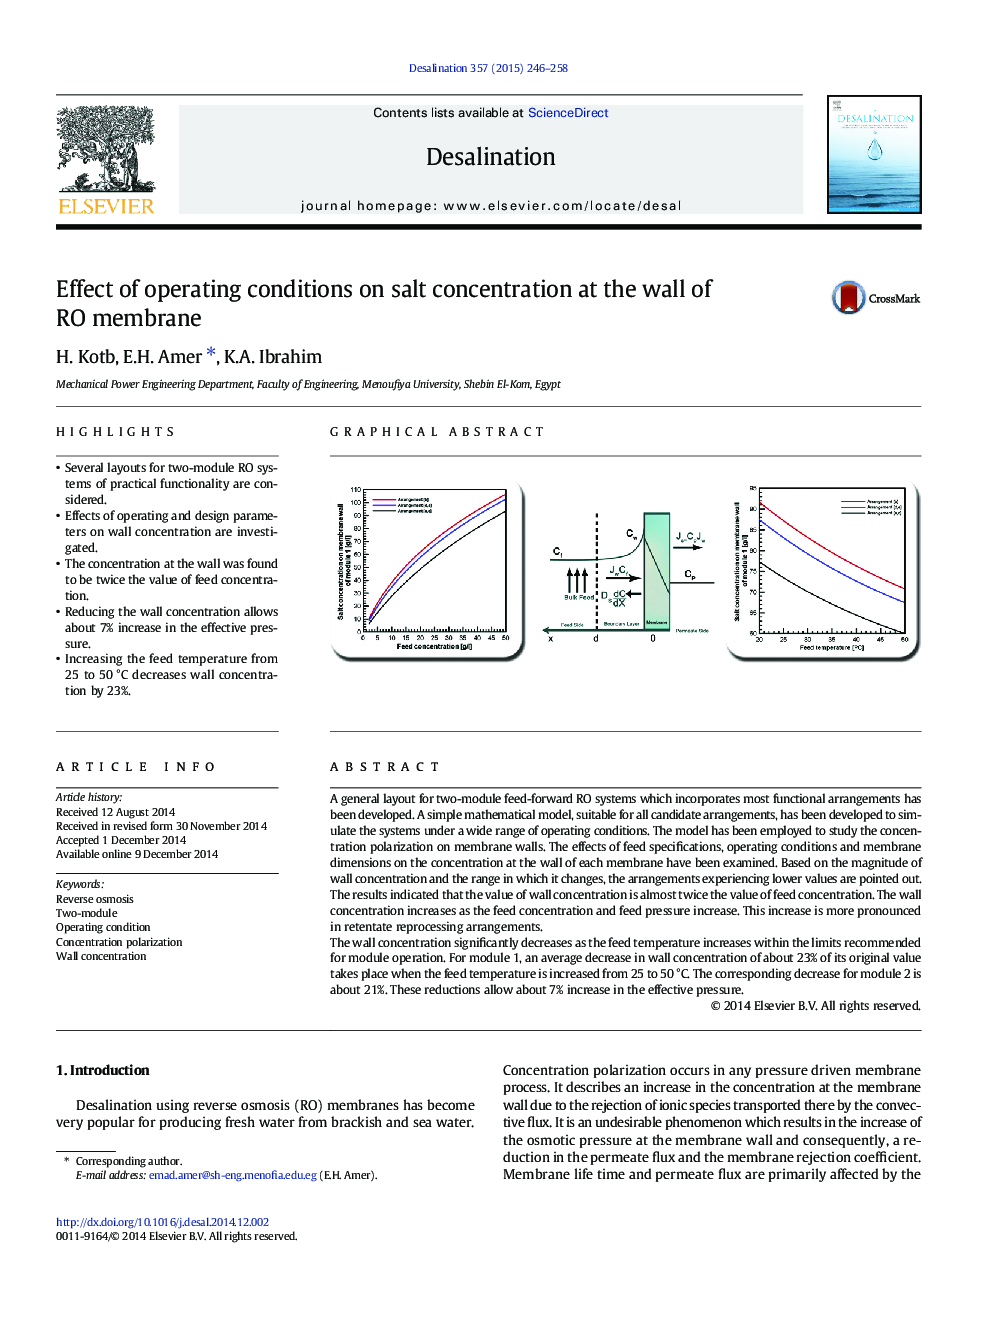 Effect of operating conditions on salt concentration at the wall of RO membrane